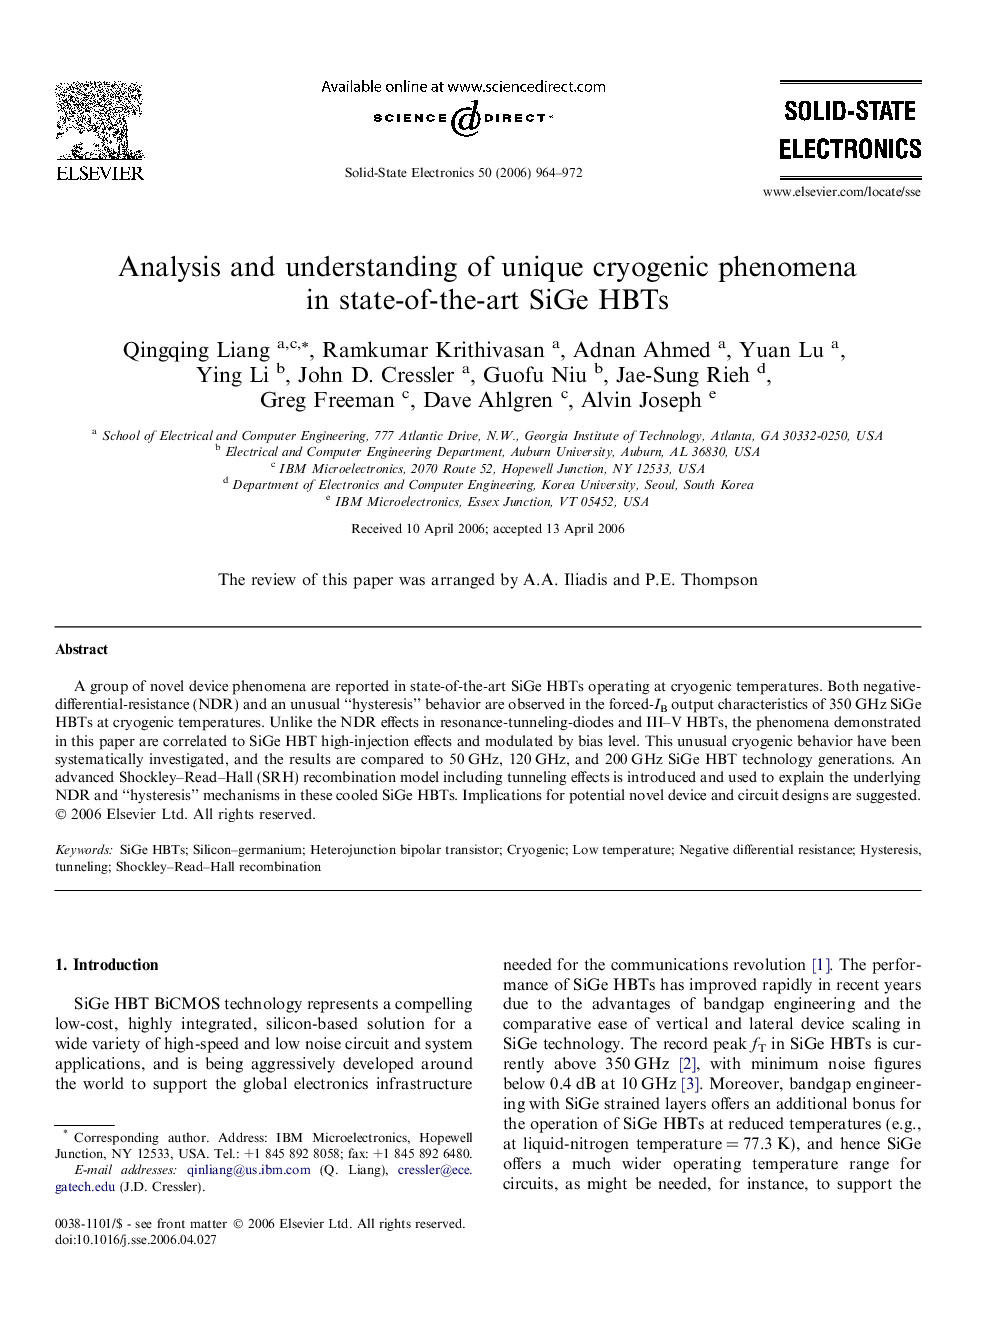 Analysis and understanding of unique cryogenic phenomena in state-of-the-art SiGe HBTs